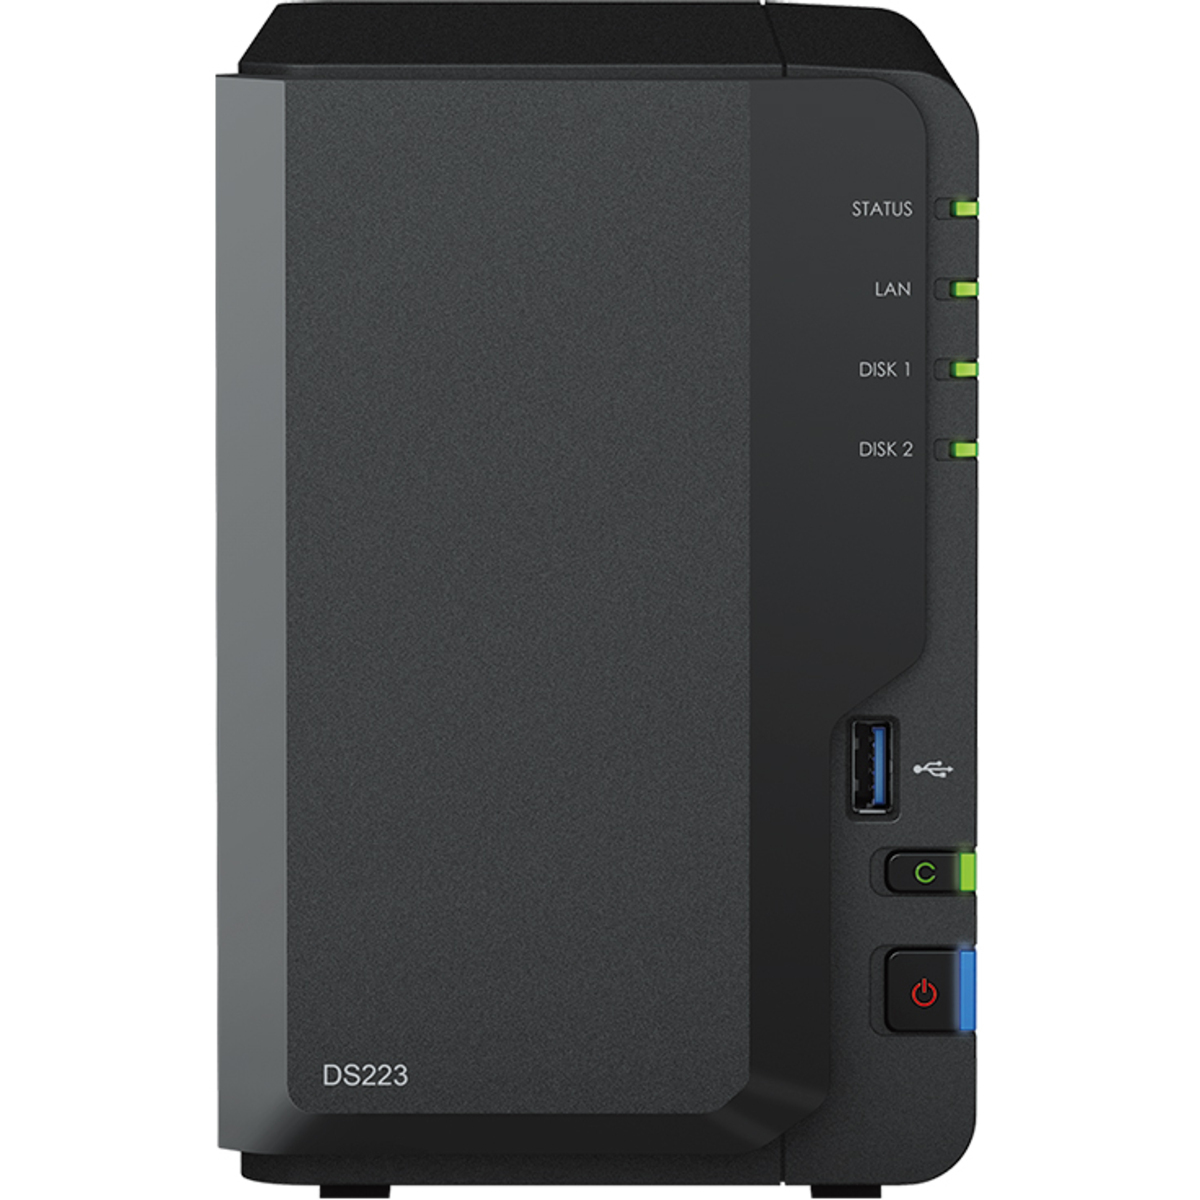 Synology DiskStation DS223 8tb 2-Bay Desktop Personal / Basic Home / Small Office NAS - Network Attached Storage Device 2x4tb Western Digital Red Pro WD4005FFBX 3.5 7200rpm SATA 6Gb/s HDD NAS Class Drives Installed - Burn-In Tested DiskStation DS223